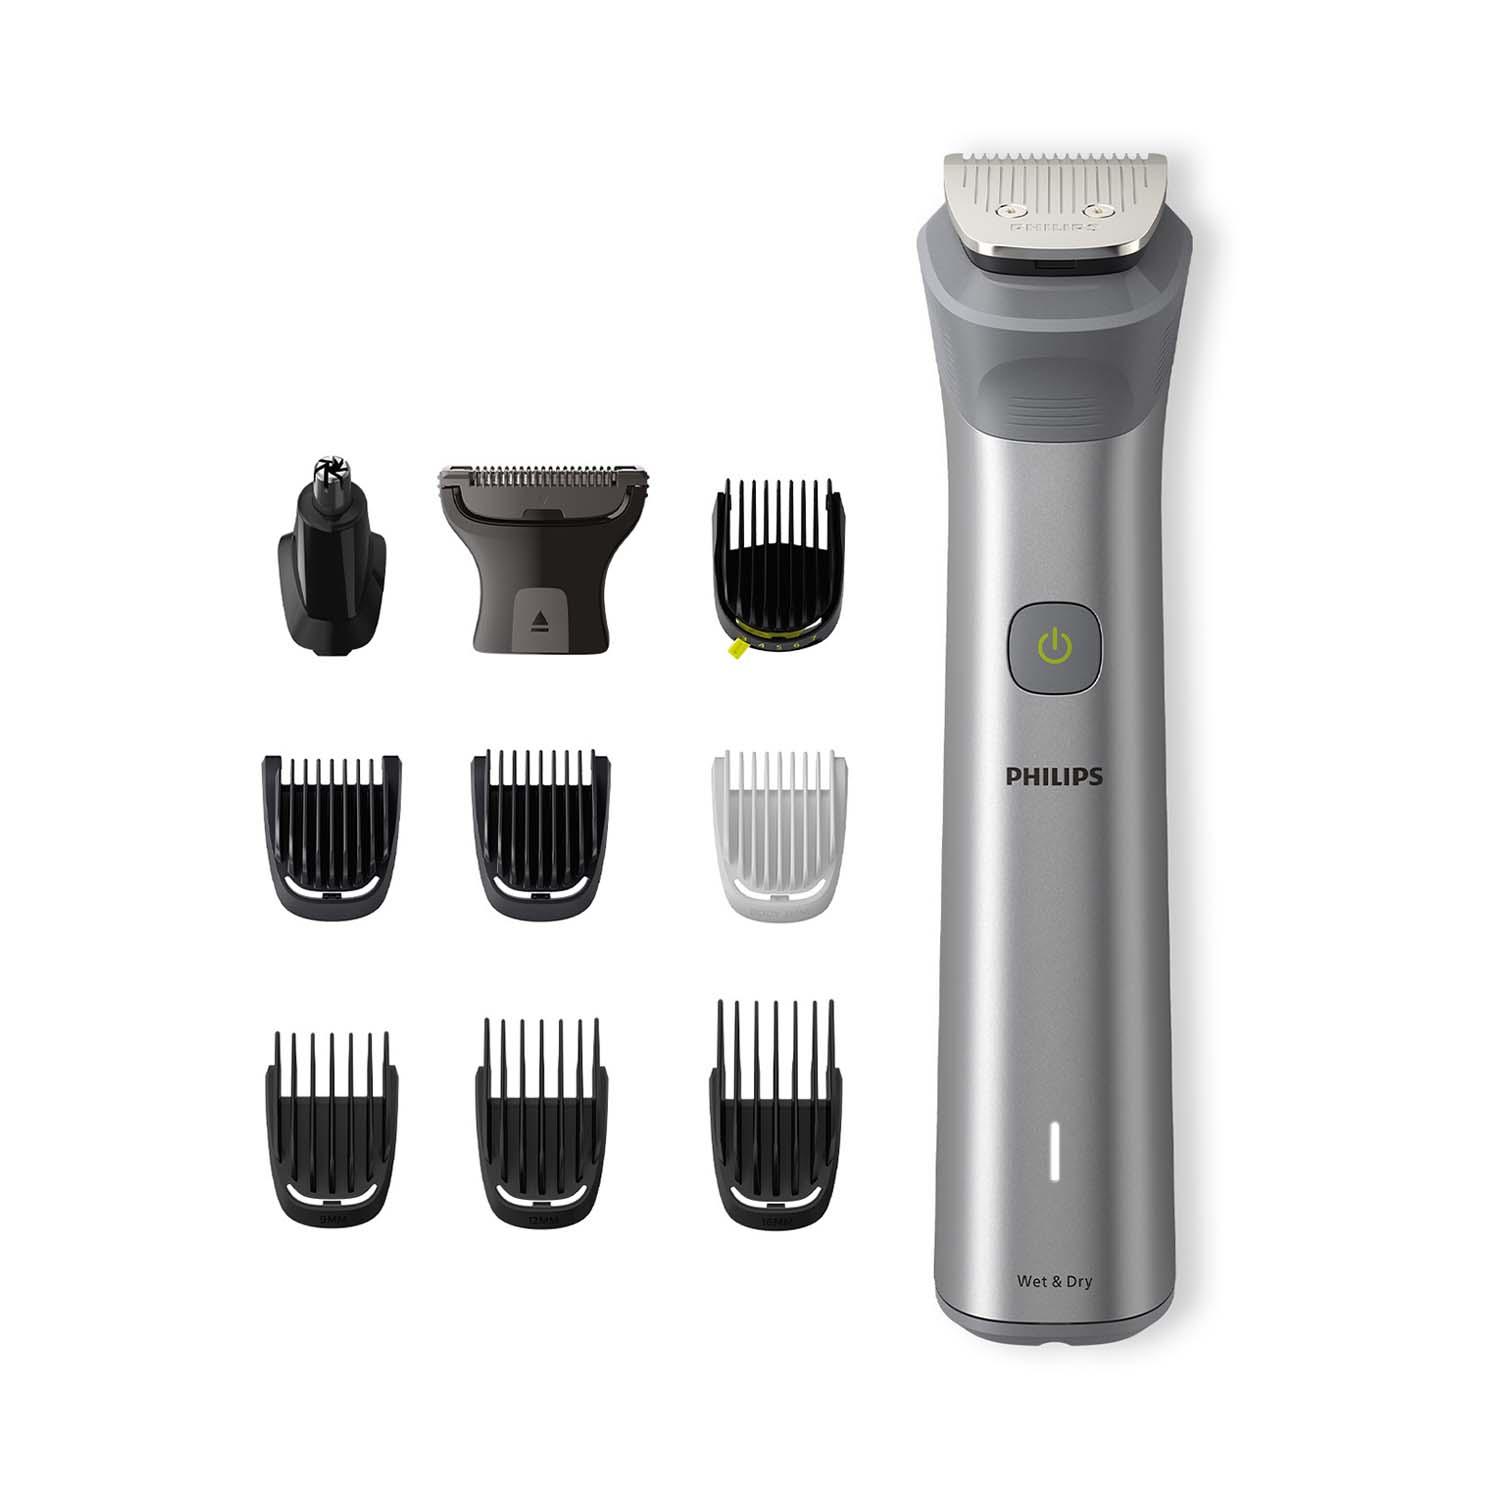 Philips | Philips Mg5930/65 All-In-1 Multi Grooming Kit